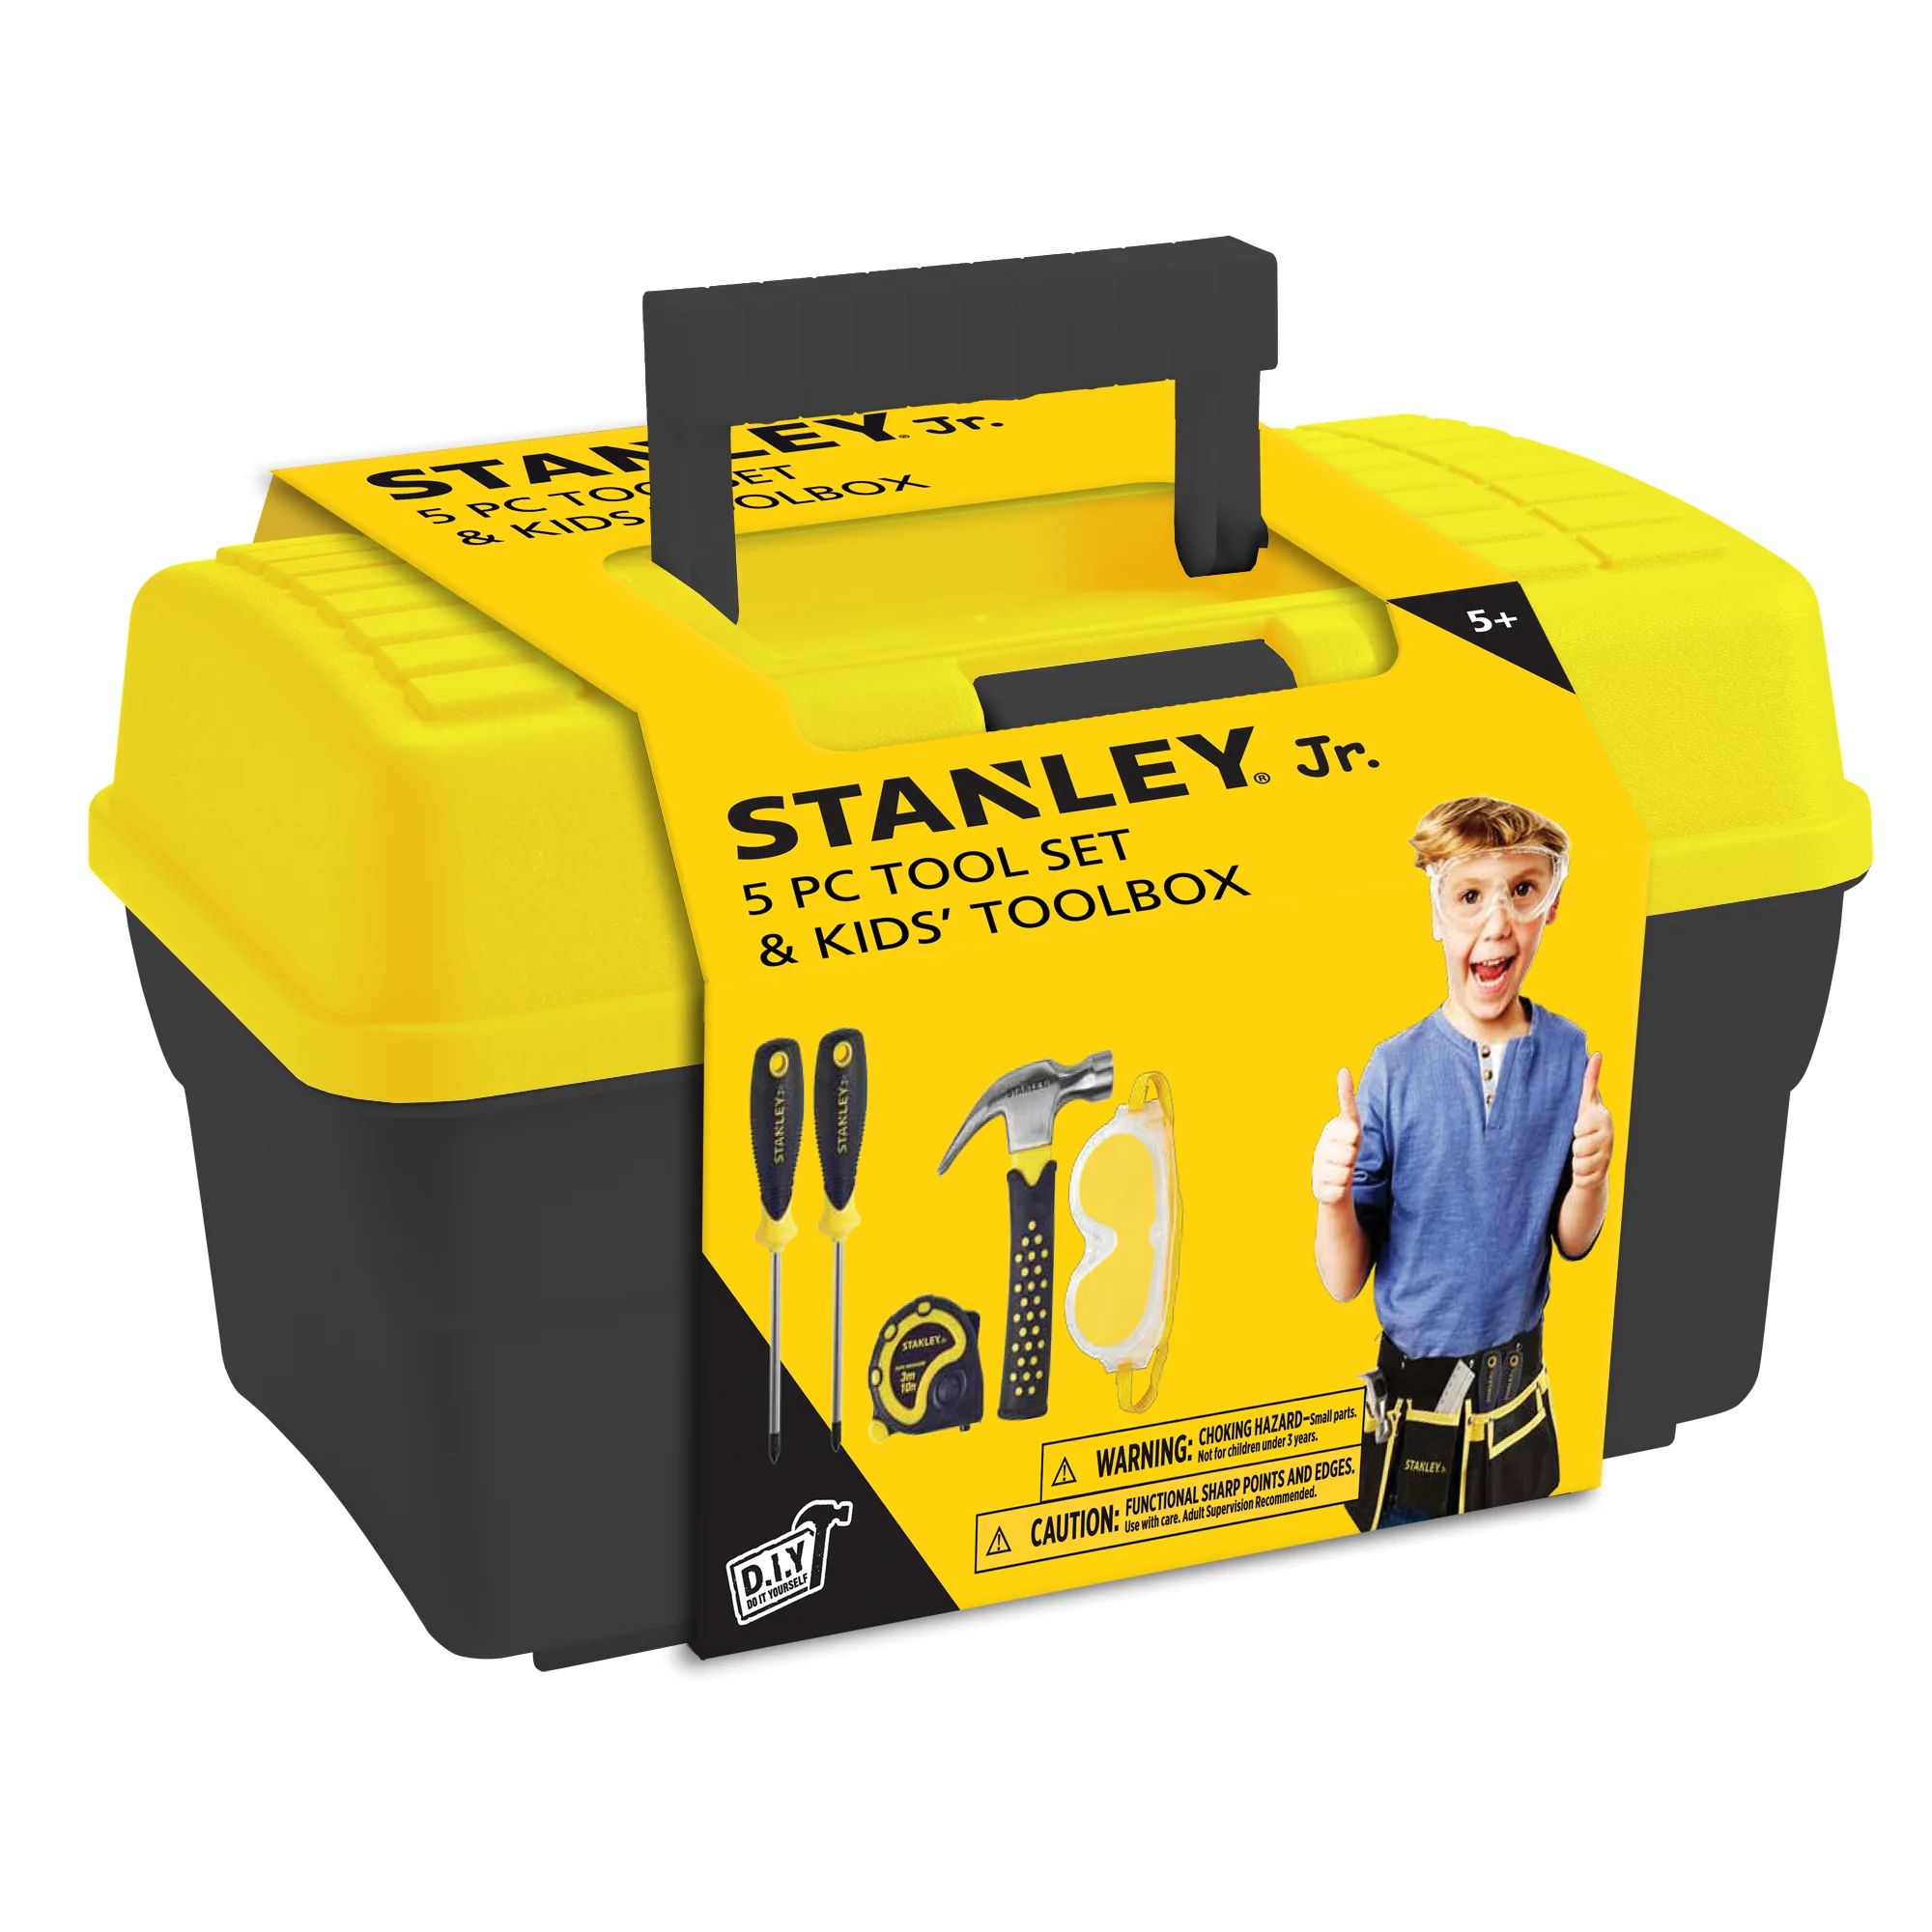 STANLEY Jr. TBS001-05-SY 5-Piece Construction Toy Tool Set with Tool Box | Walmart (US)